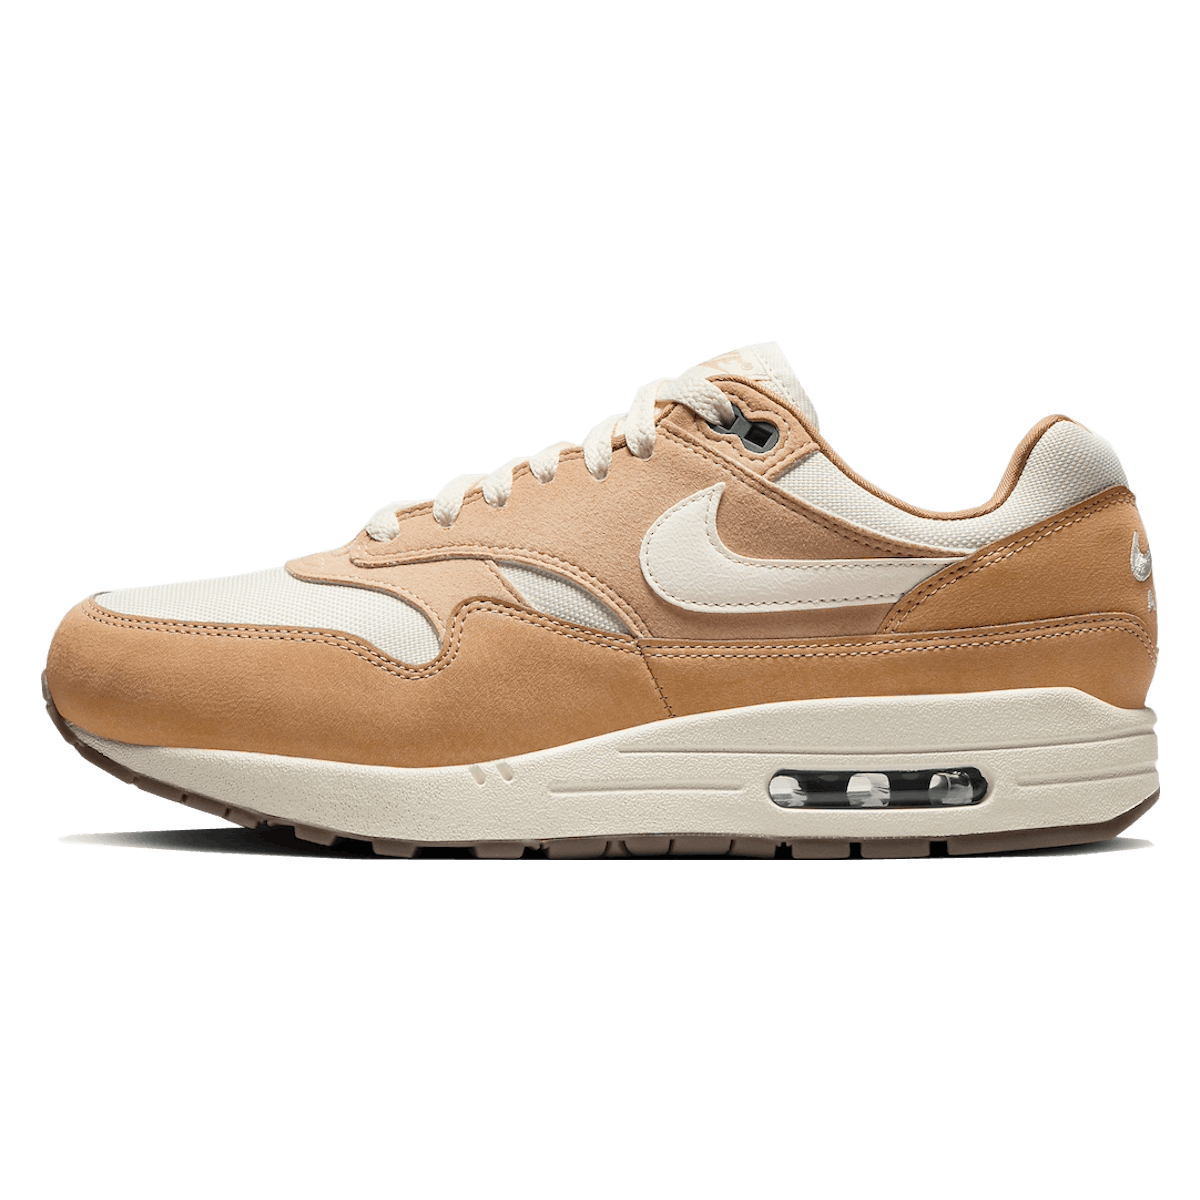 Nike Air Max 1 "Flax and Coconut Milk"